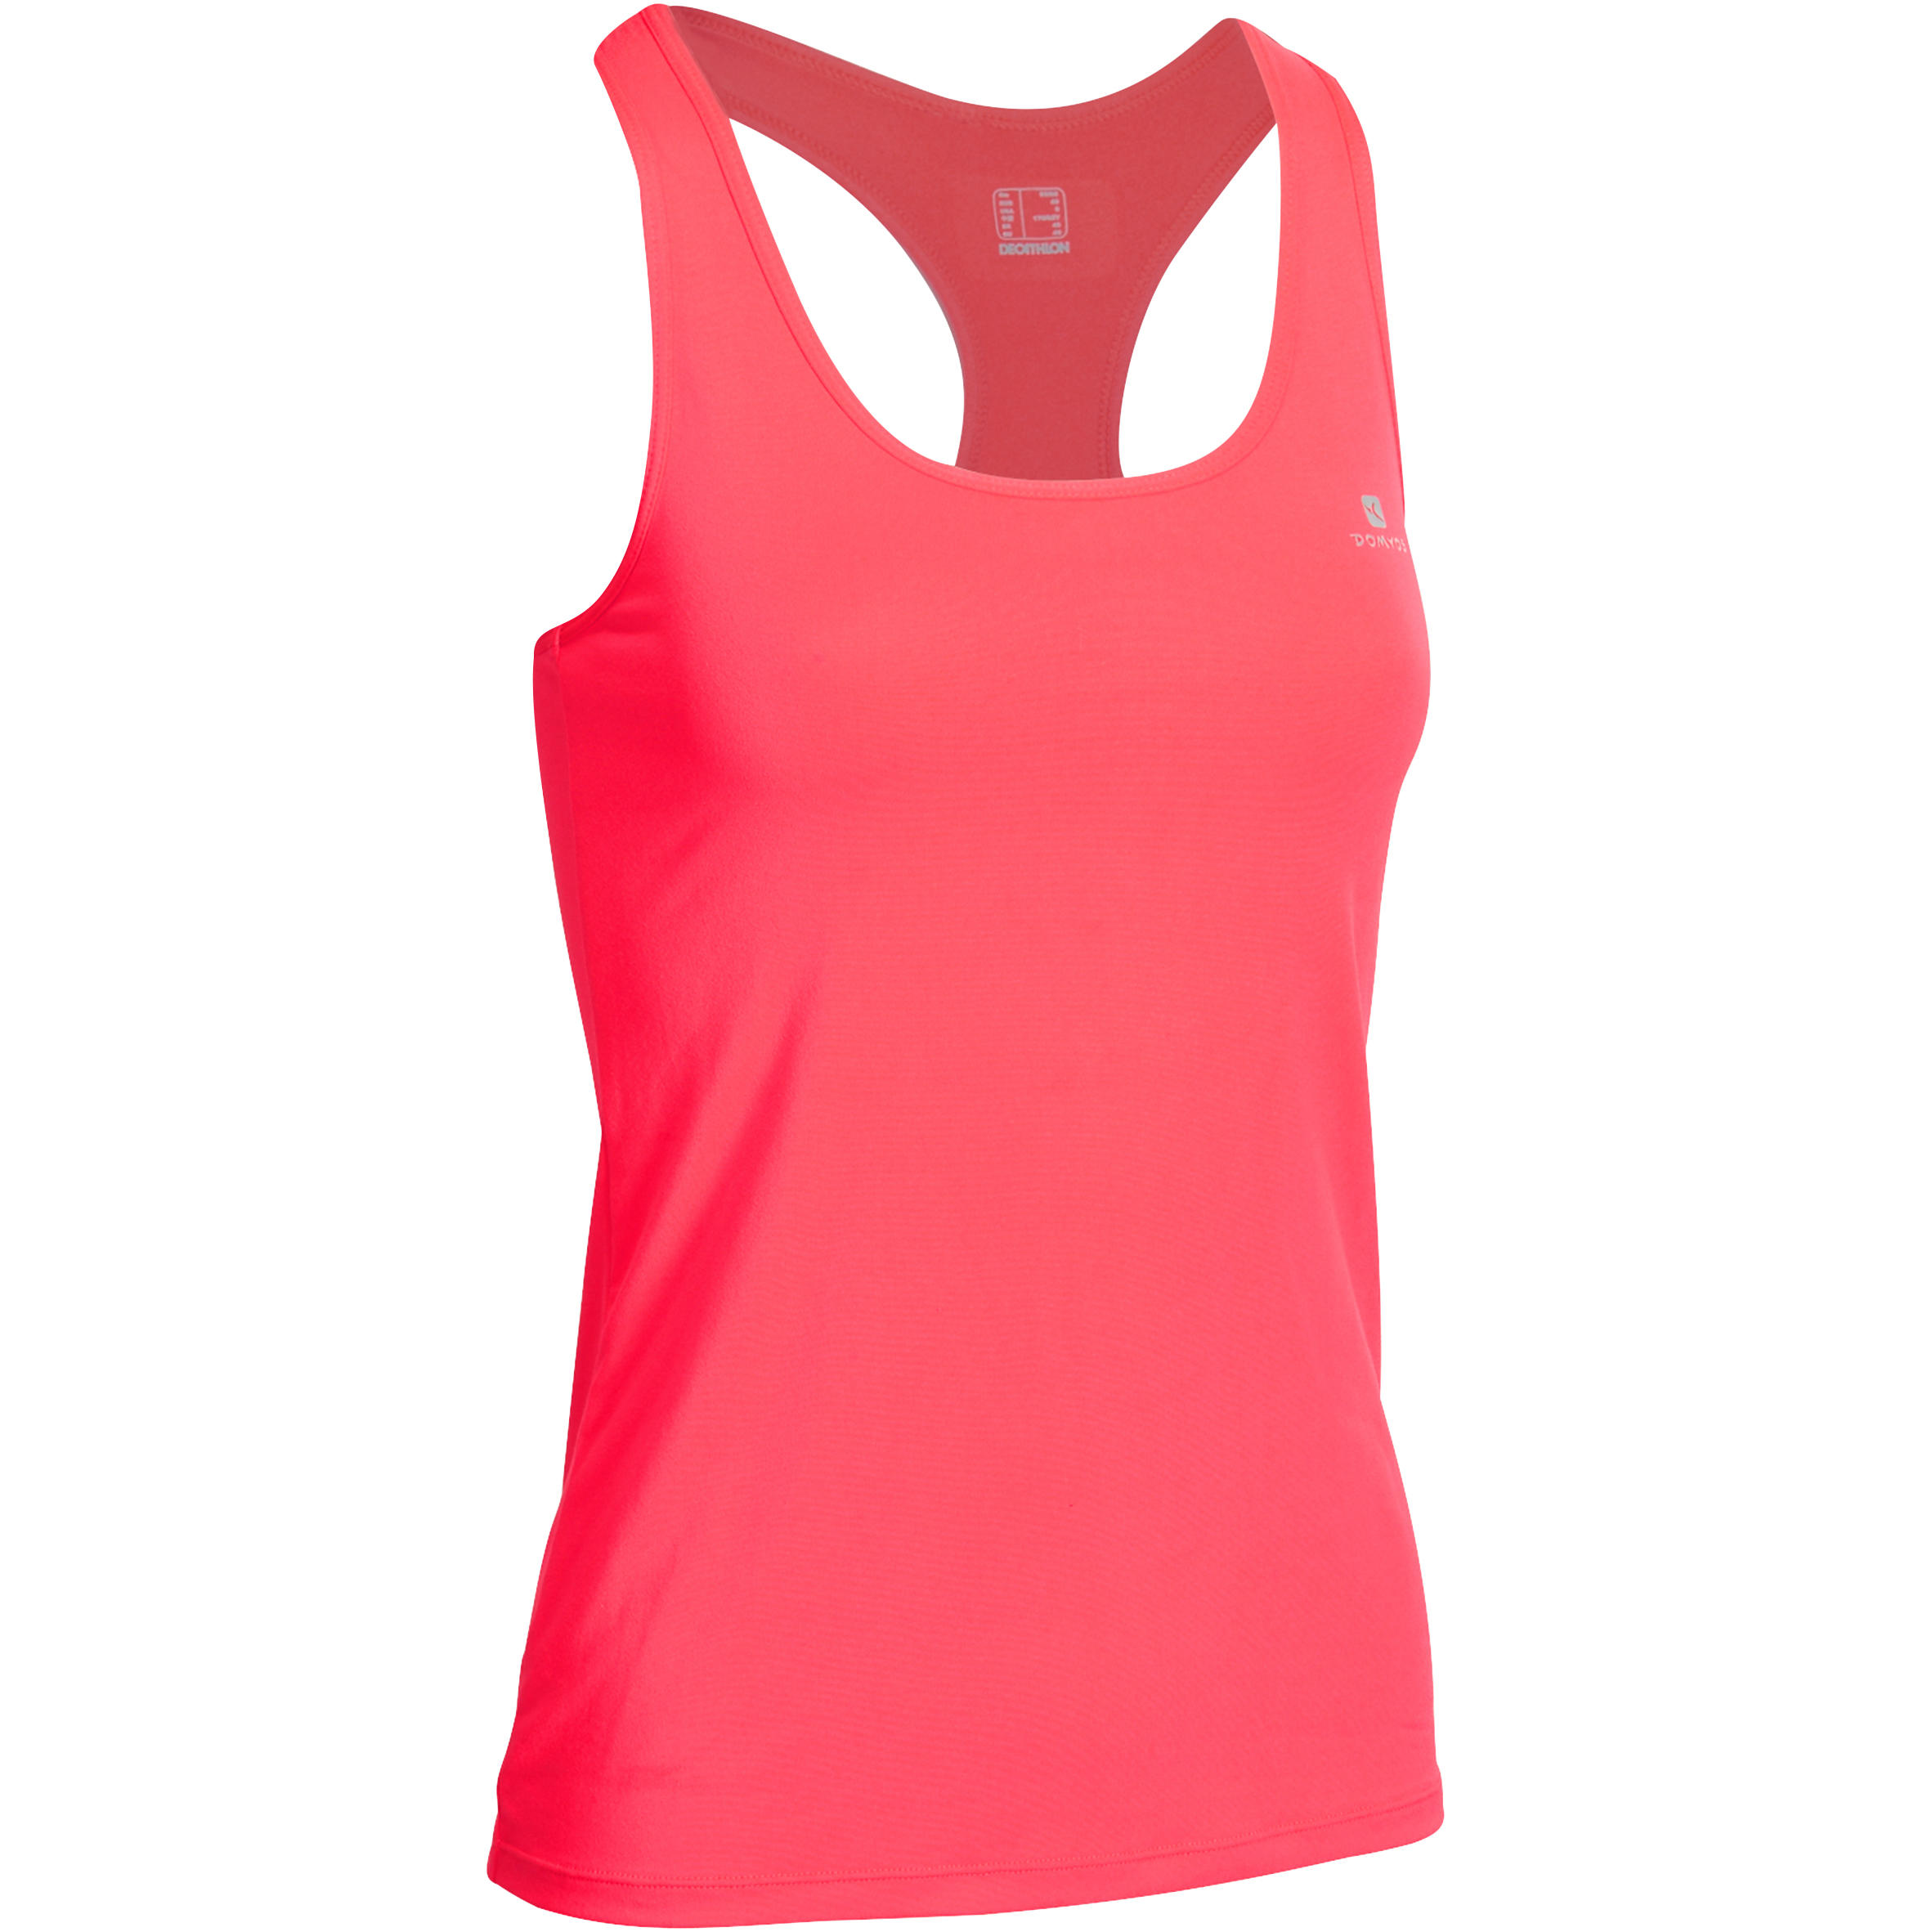 My Top Women's Fitness Tank Top - Pink/Red 1/11